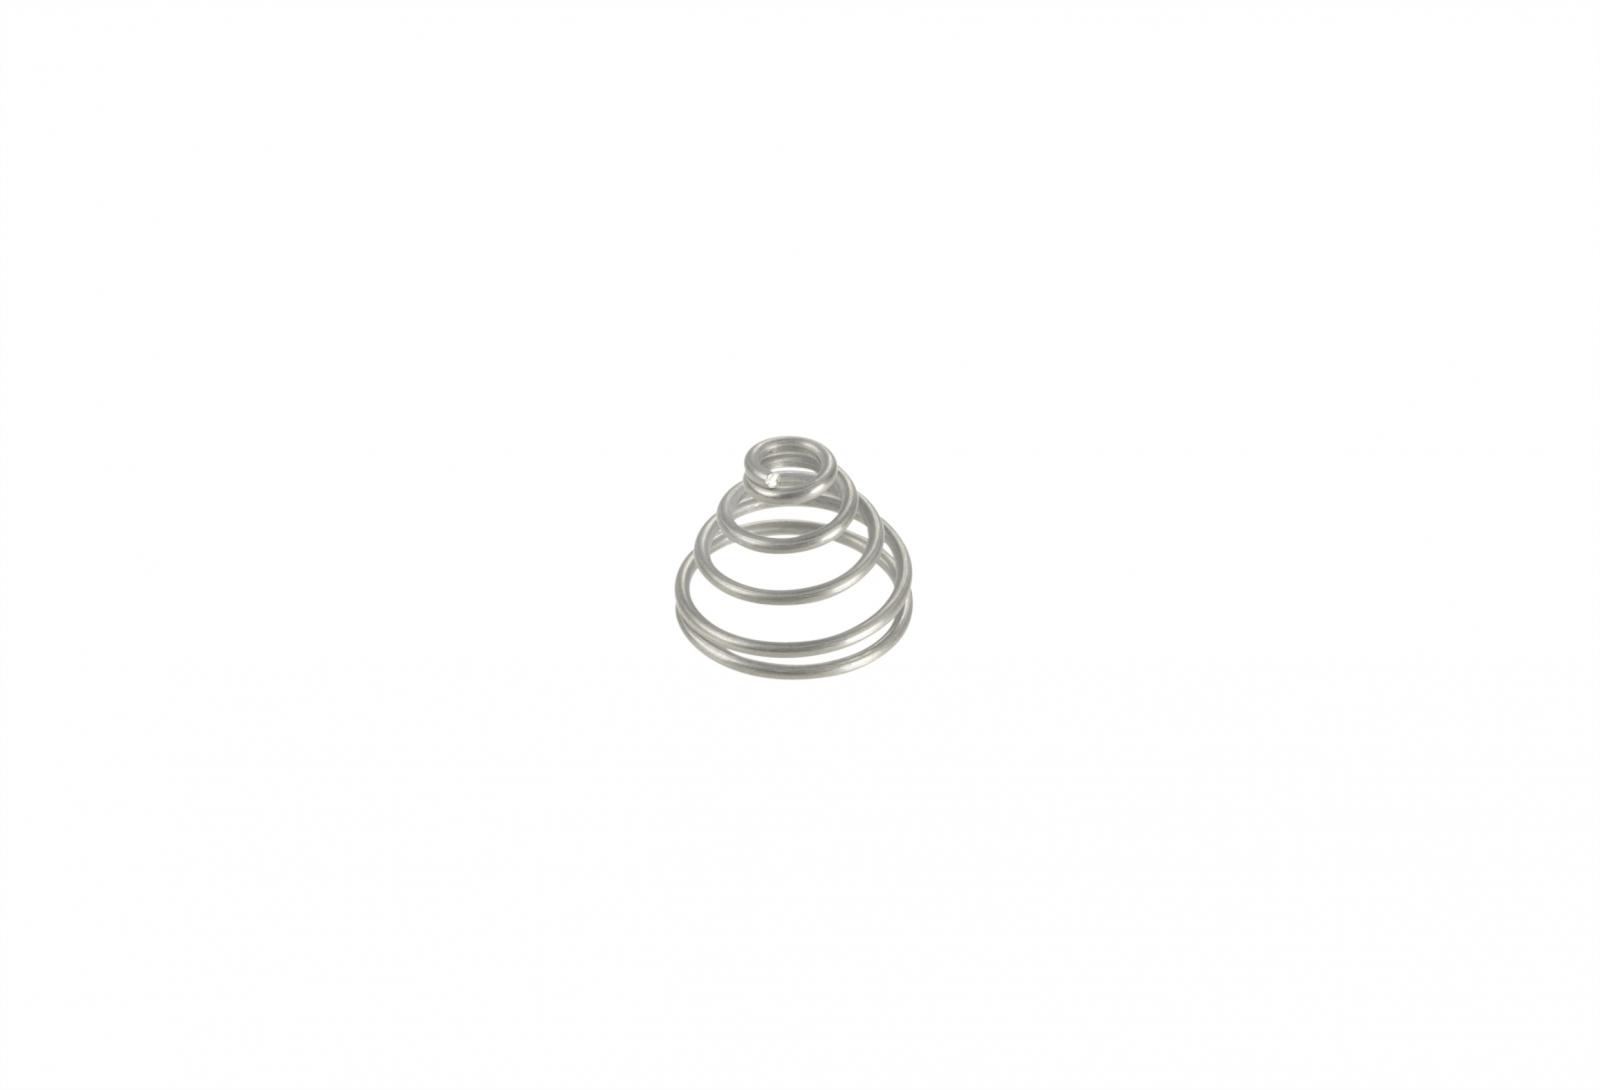 TapeTech® Conical Spring. Part number 889017